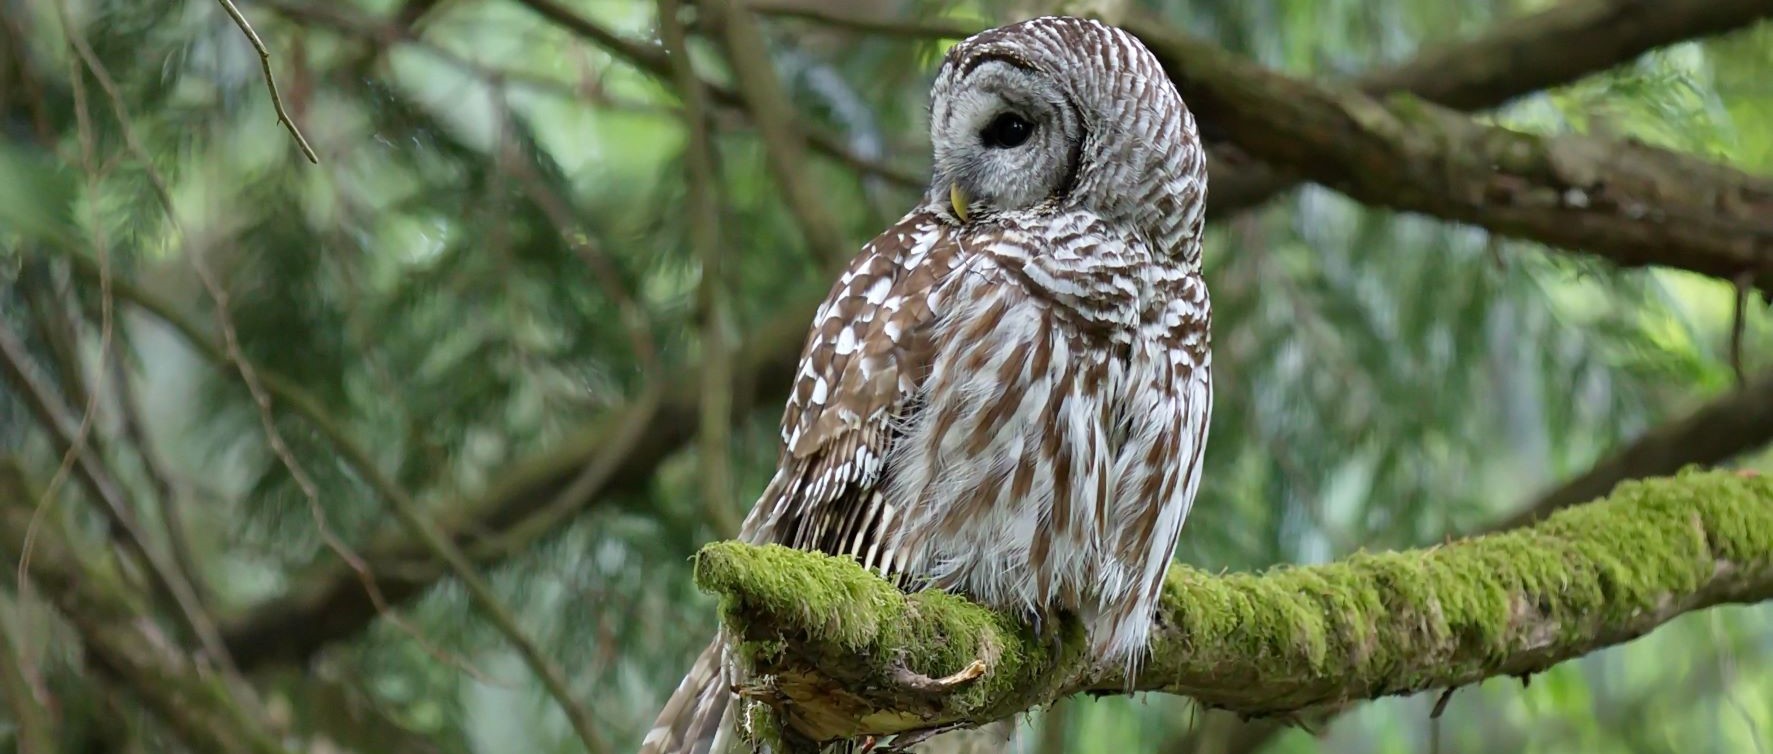 All About Owls (Virtual)